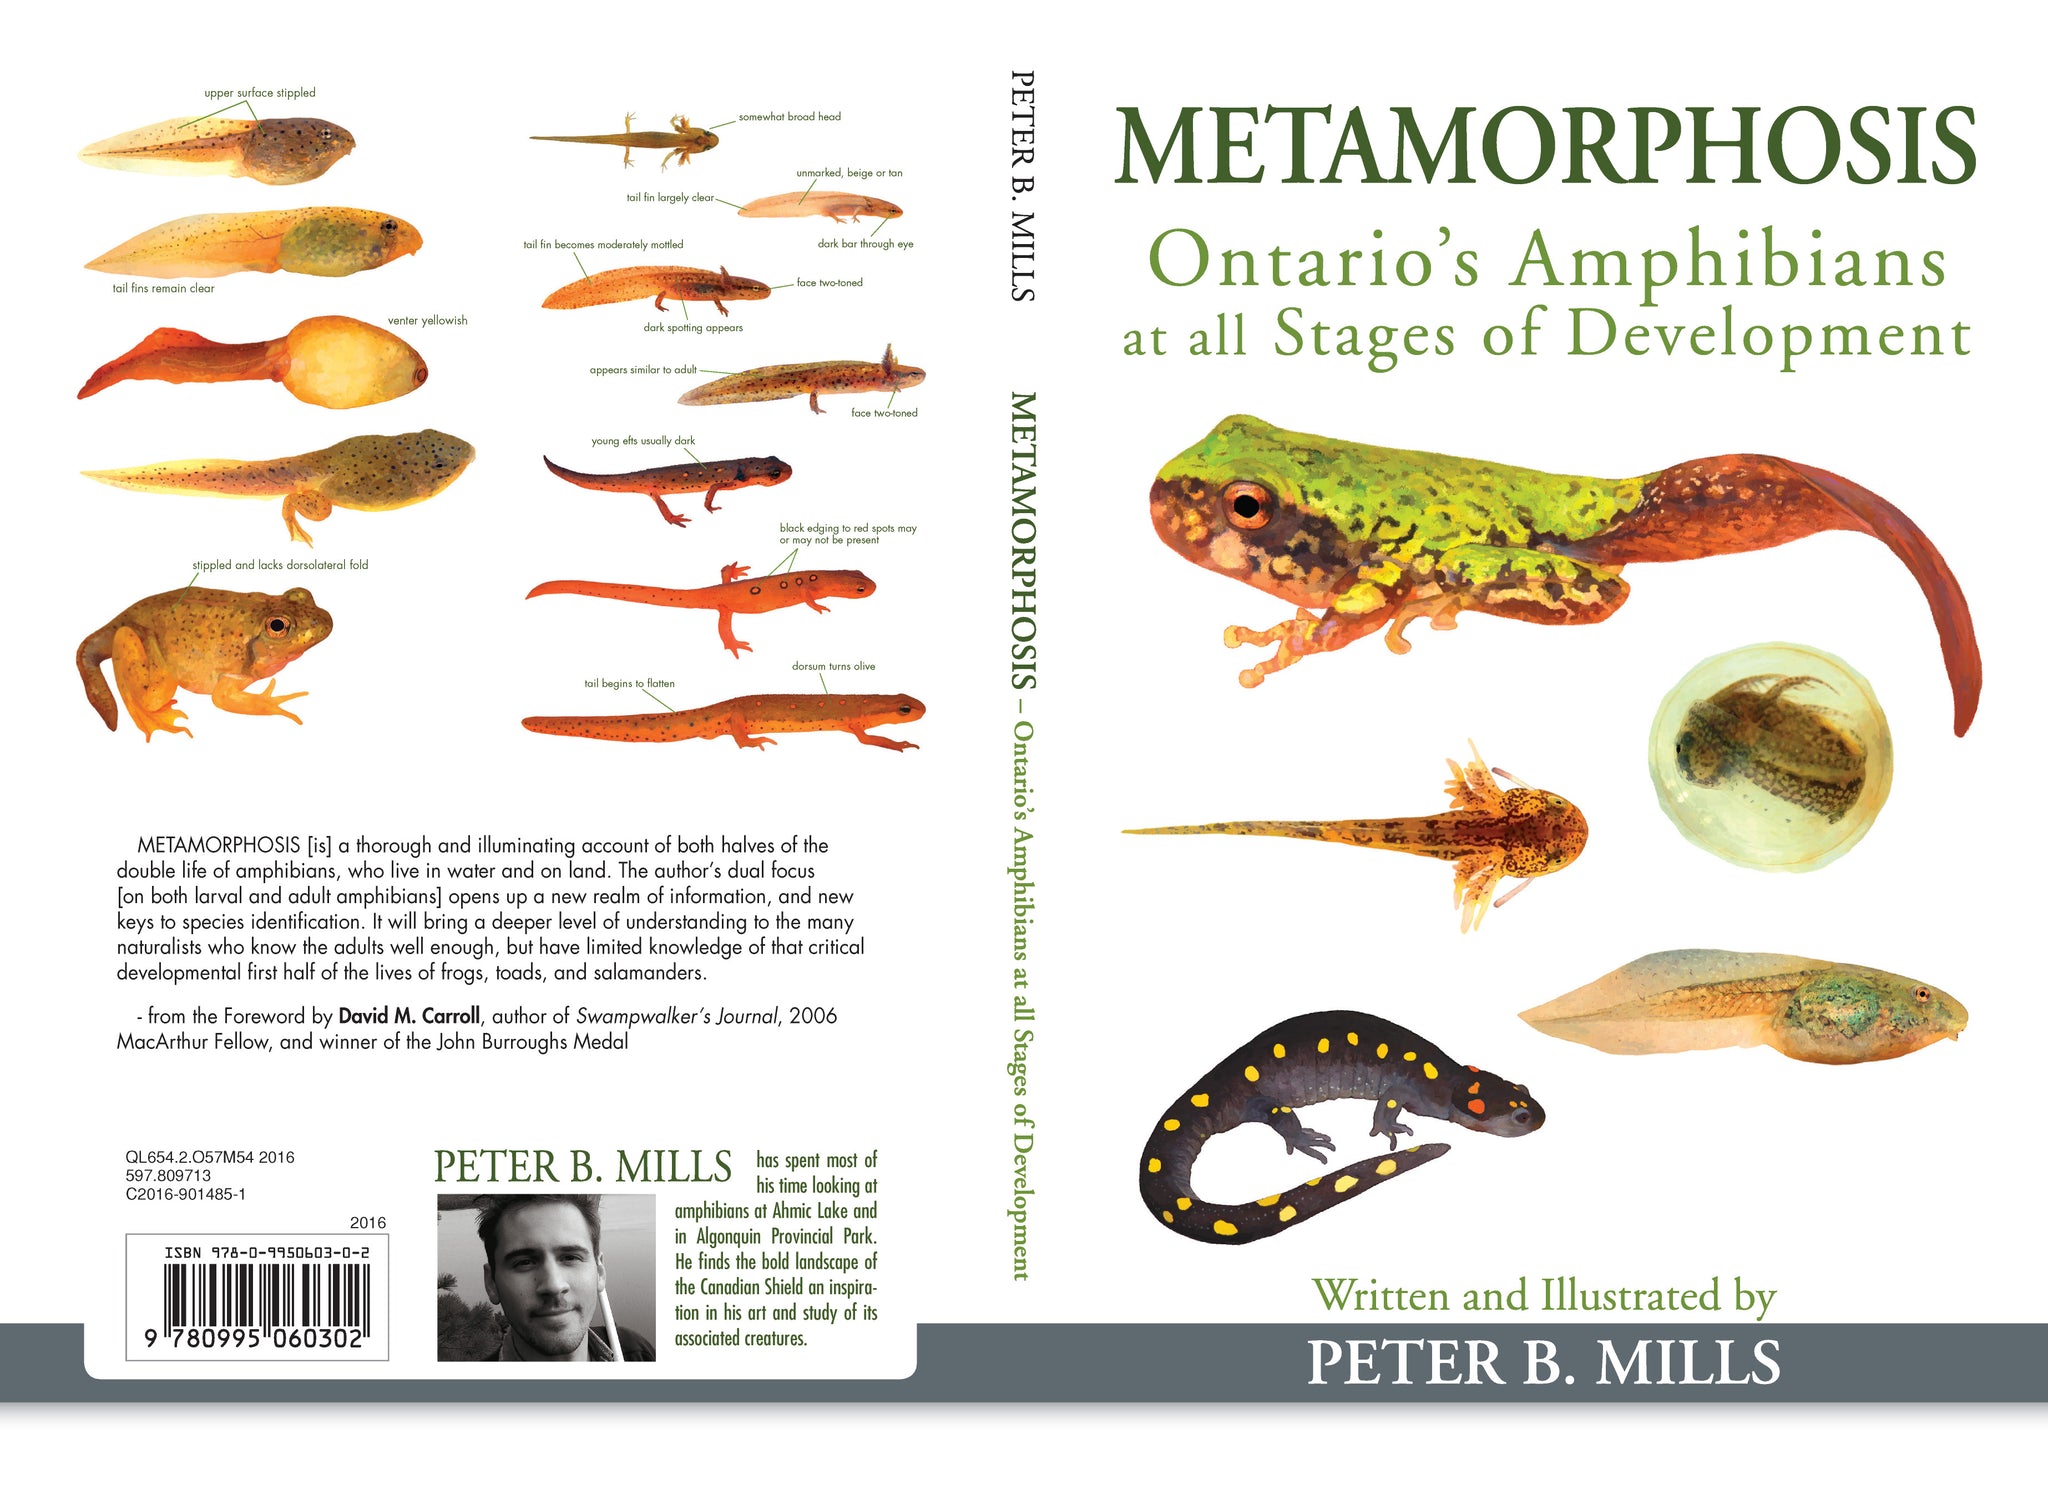 Metamorphosis: Ontario's Amphibians at all Stages of Development